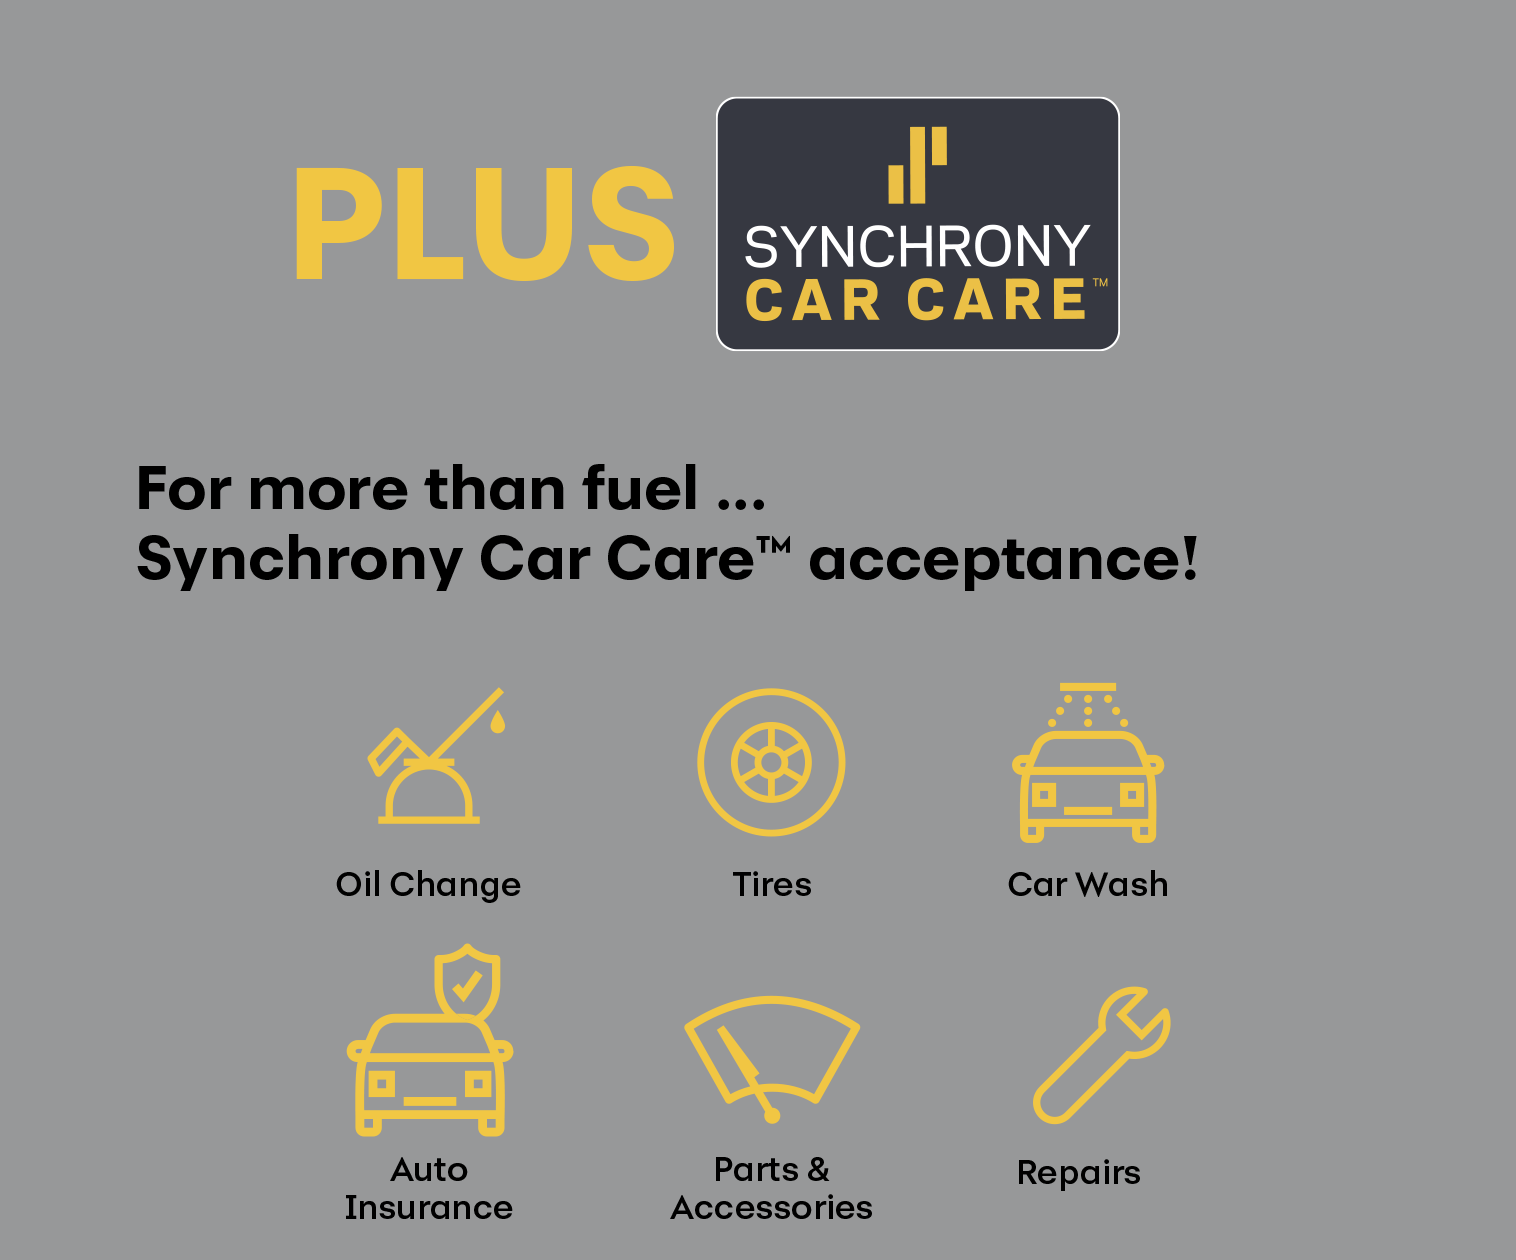 PLUS Synchrony Car Care™ acceptance! For more than fuel... Synchrony Car Care™ acceptance! Oil Change, Tires, Car Wash, Auto Insurance, Parts & Accessories, Repairs